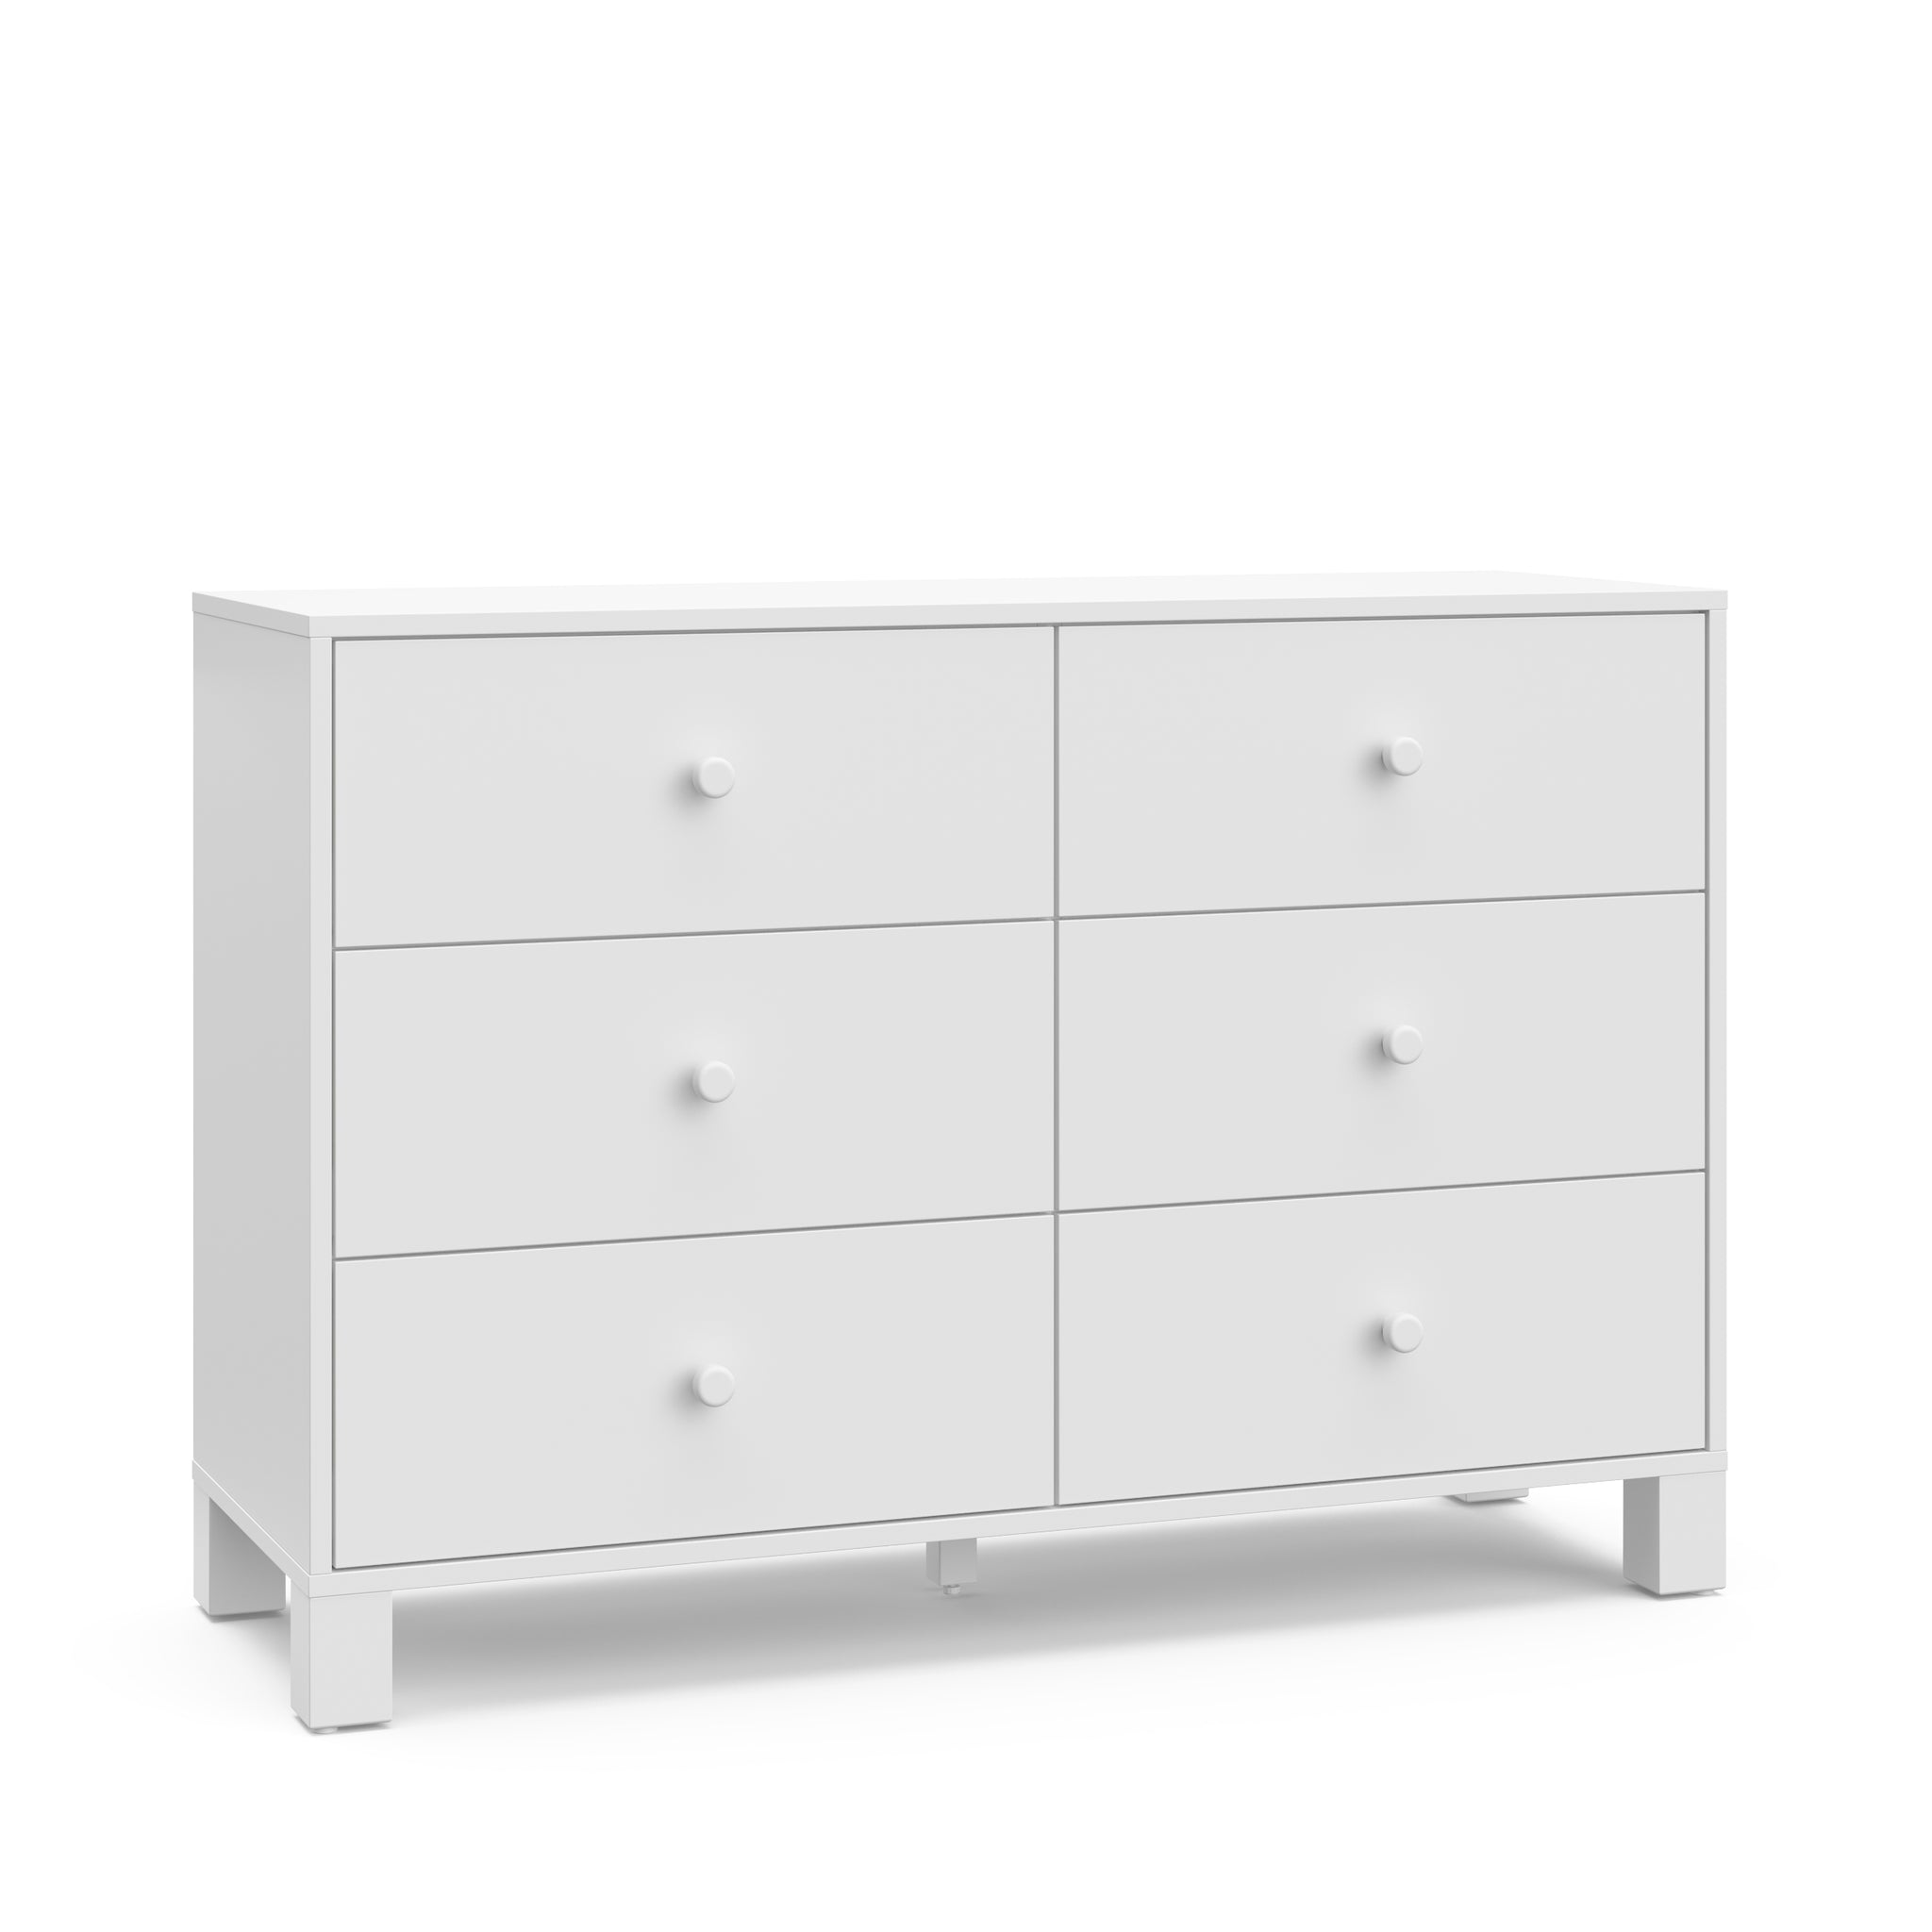 Angled view of white dresser